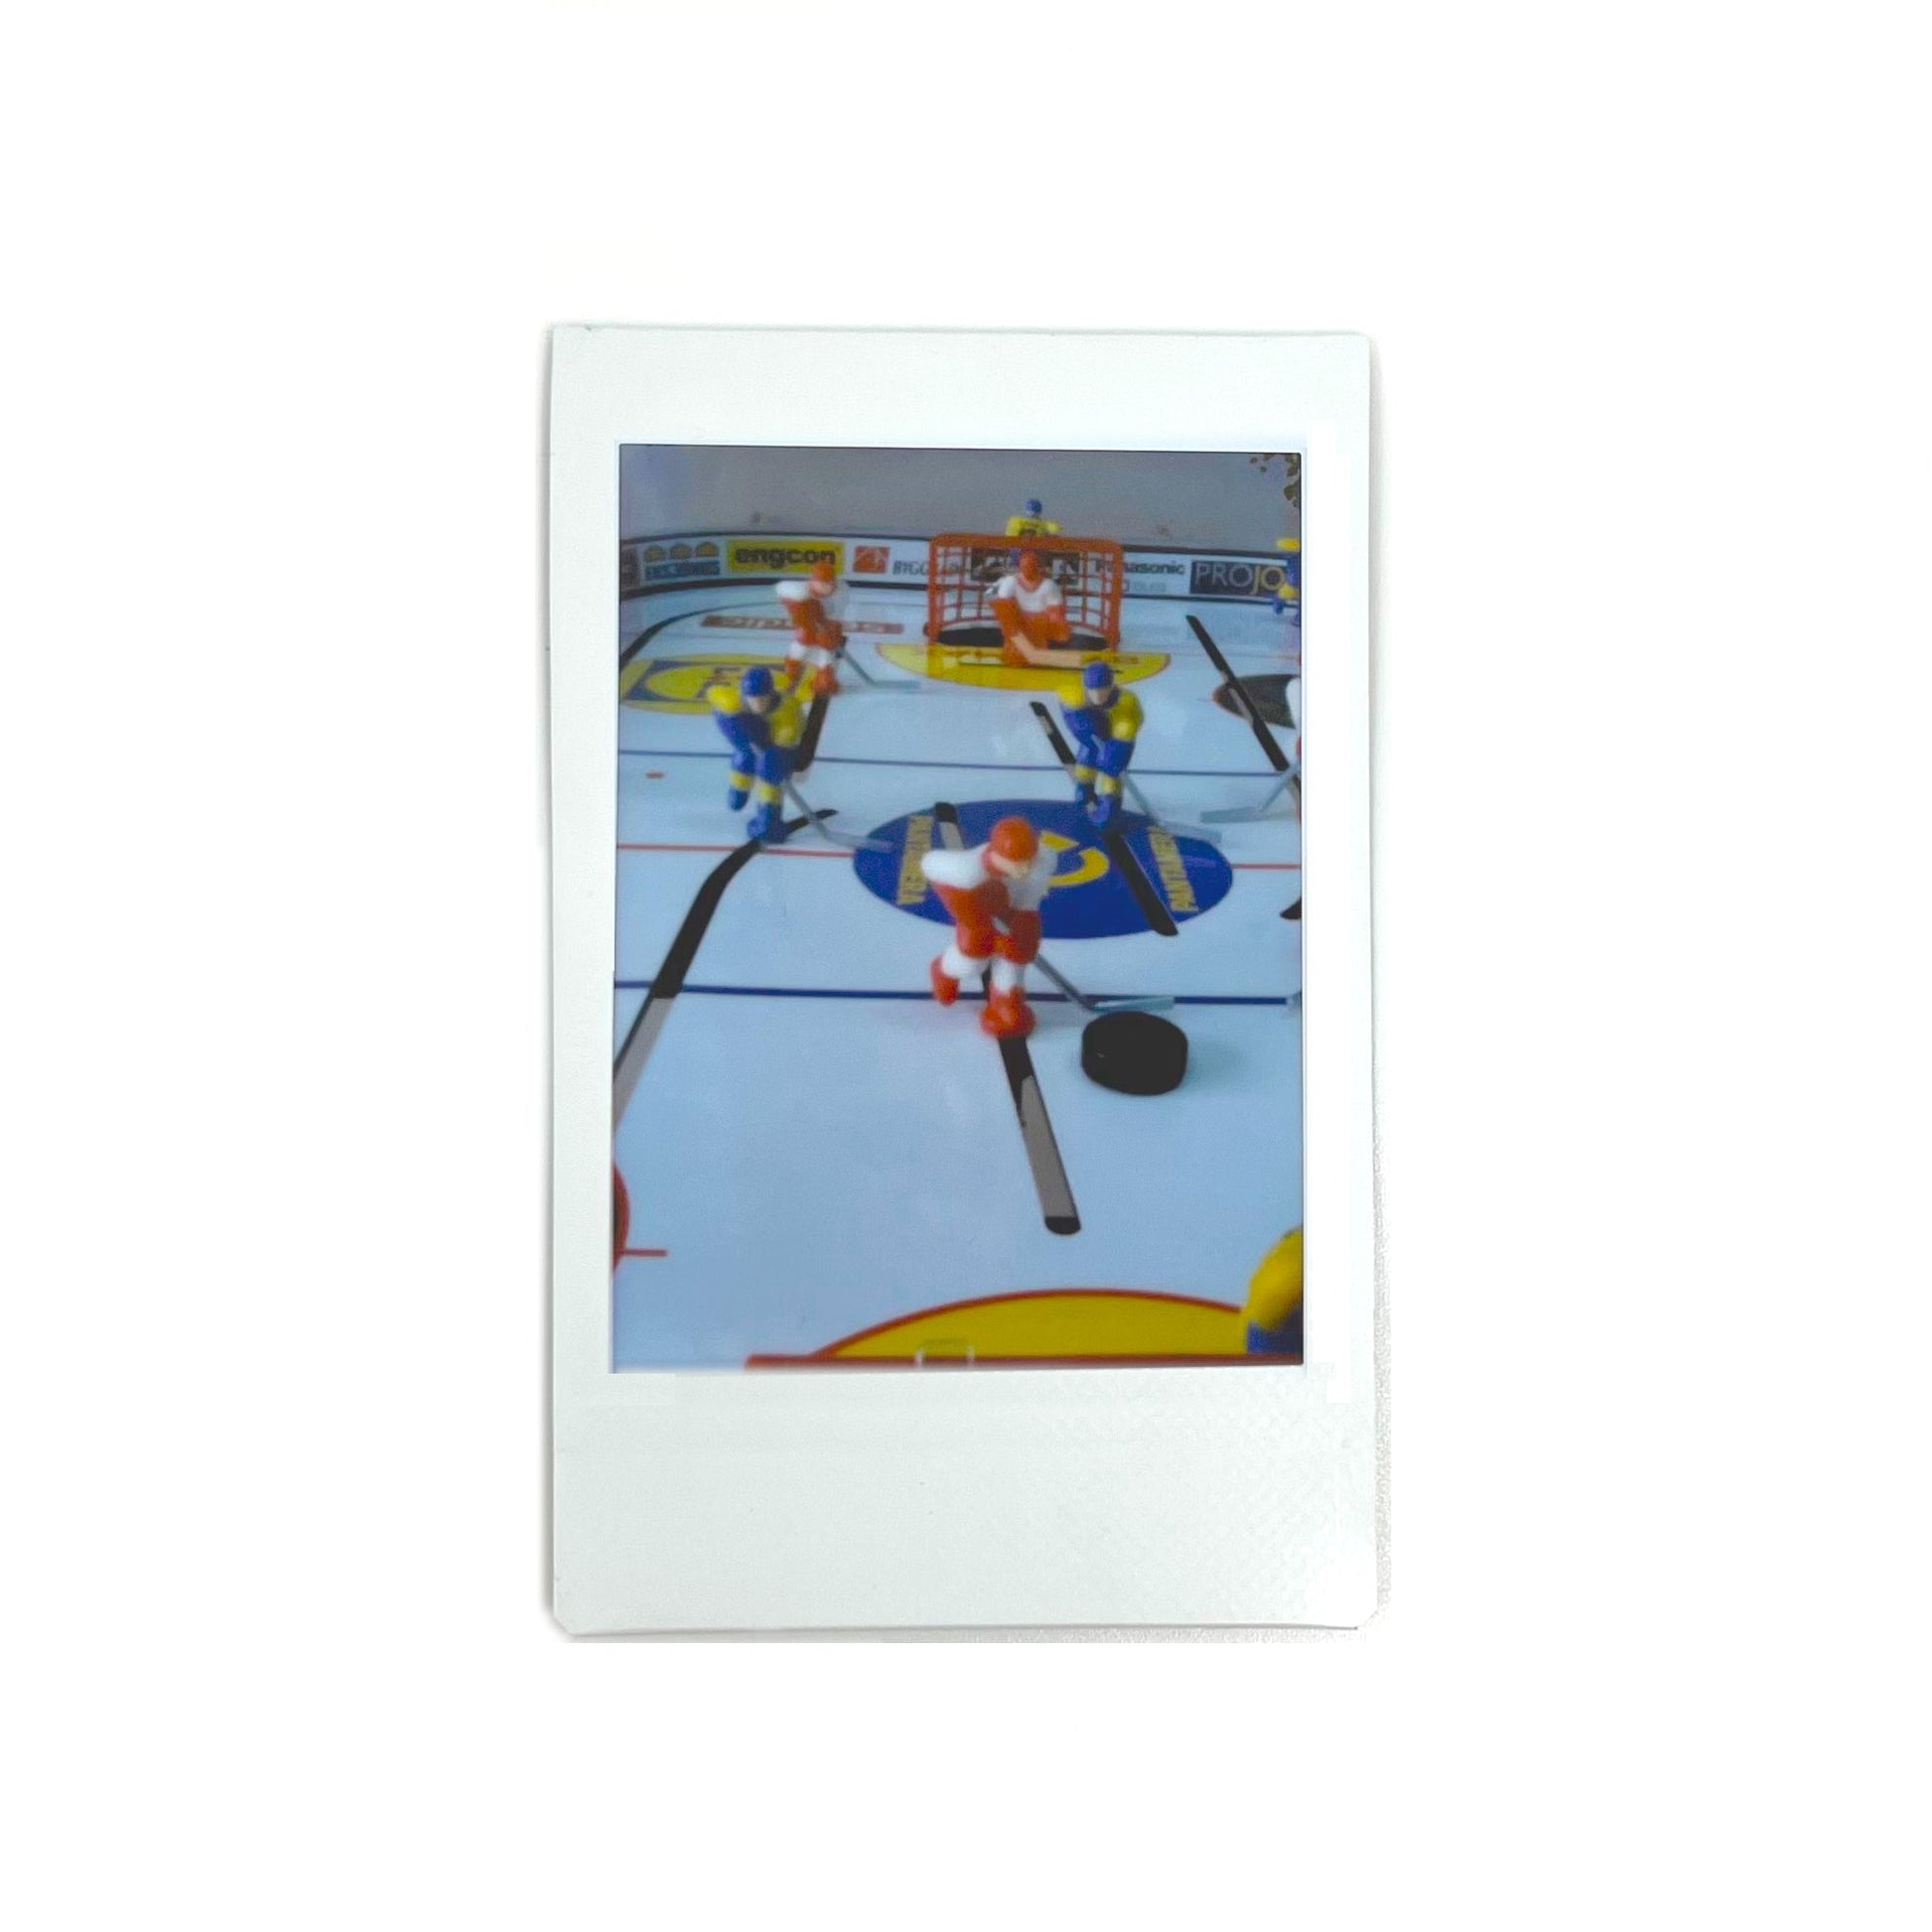 An instant photo taken with a Jollylook Pinhole Mini camera, positioned against a white background. The photo features a table hockey game